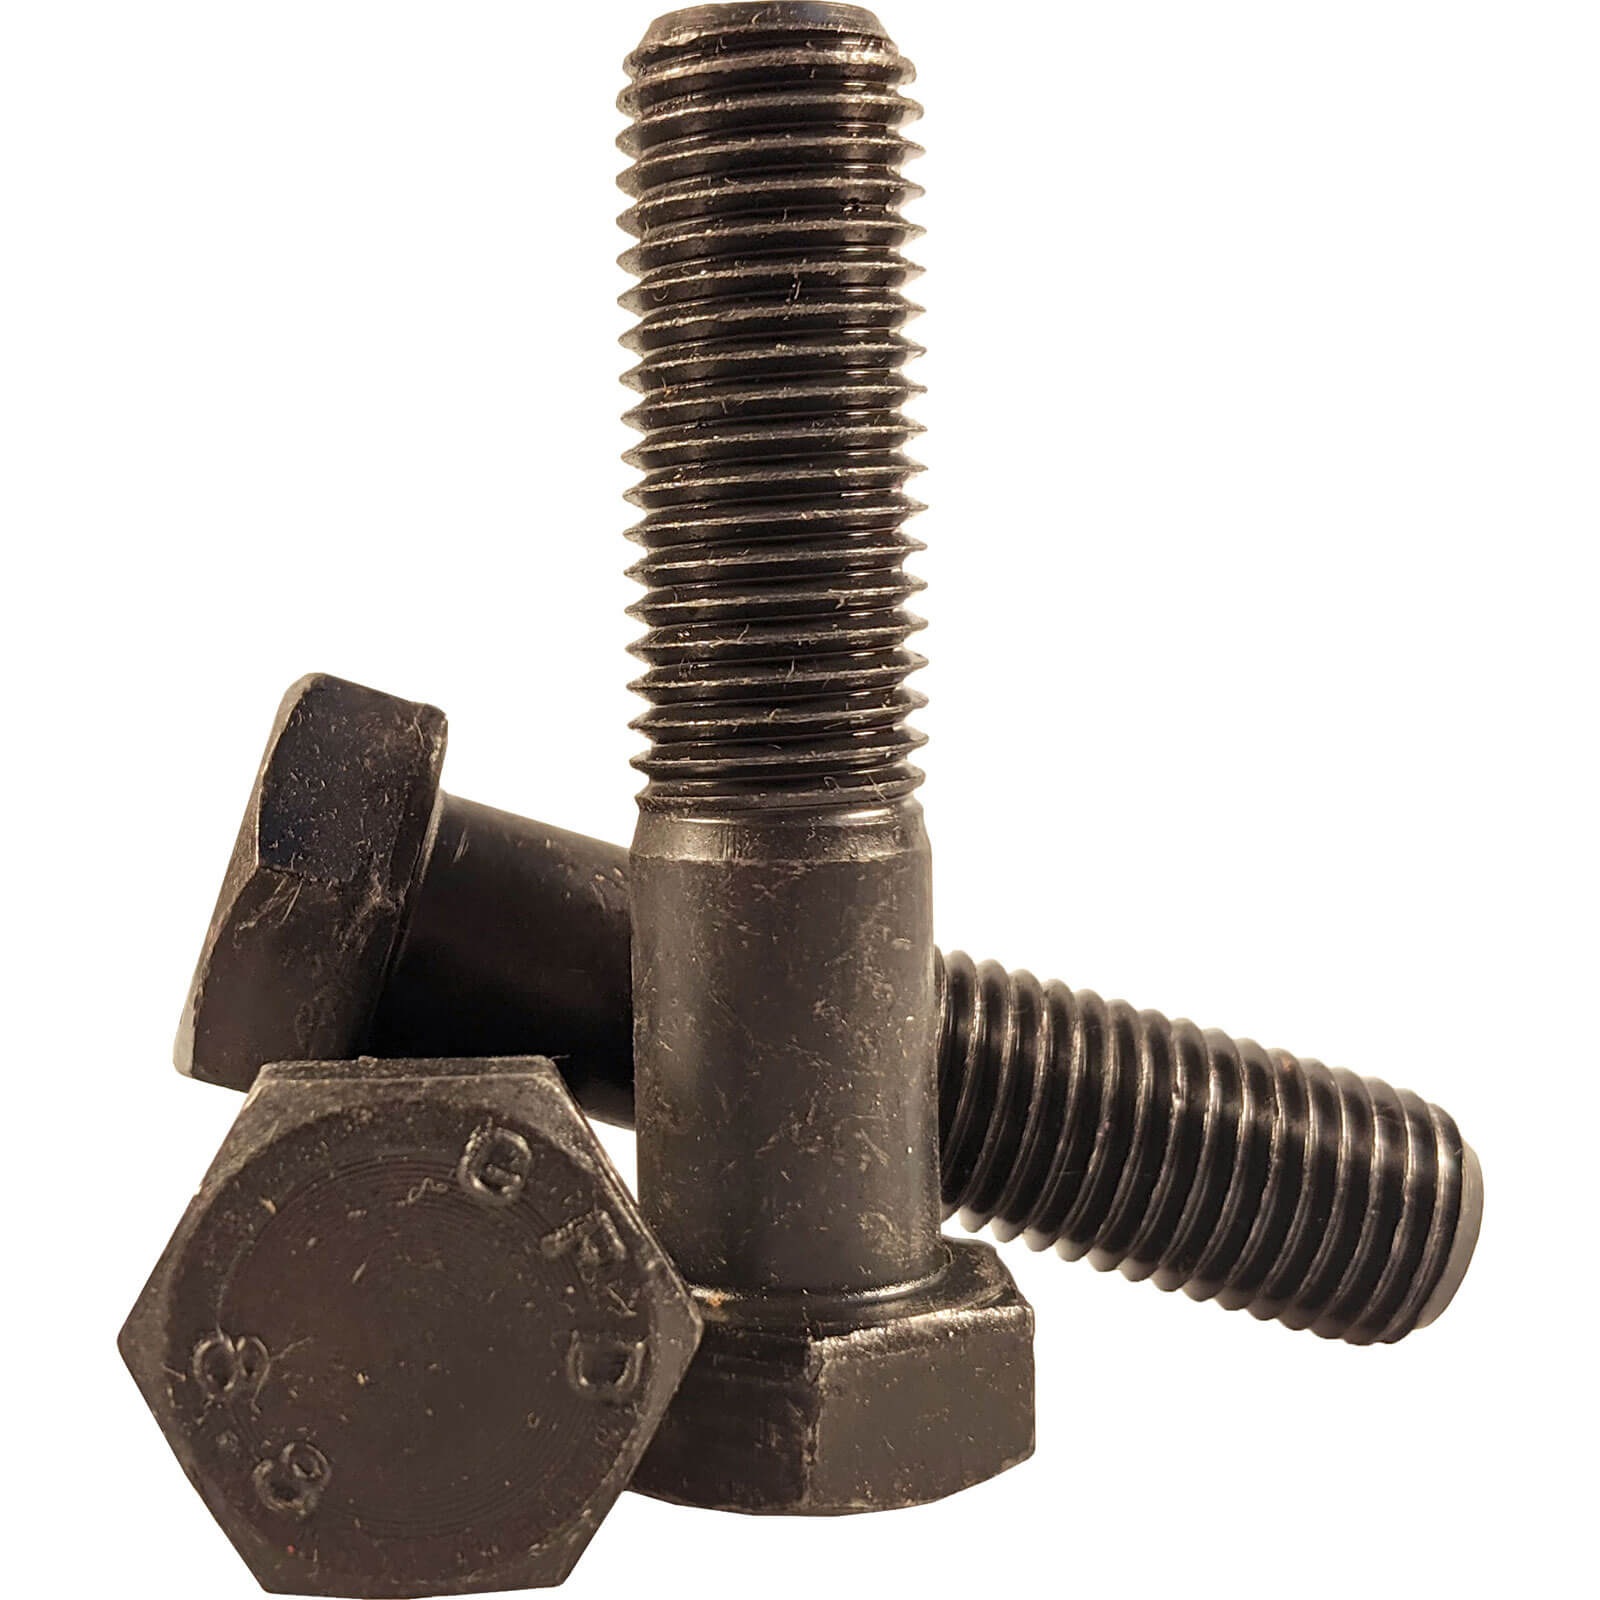 Image of Sirius Bolts High Tensil 8.8 Grade M30 300mm Pack of 1